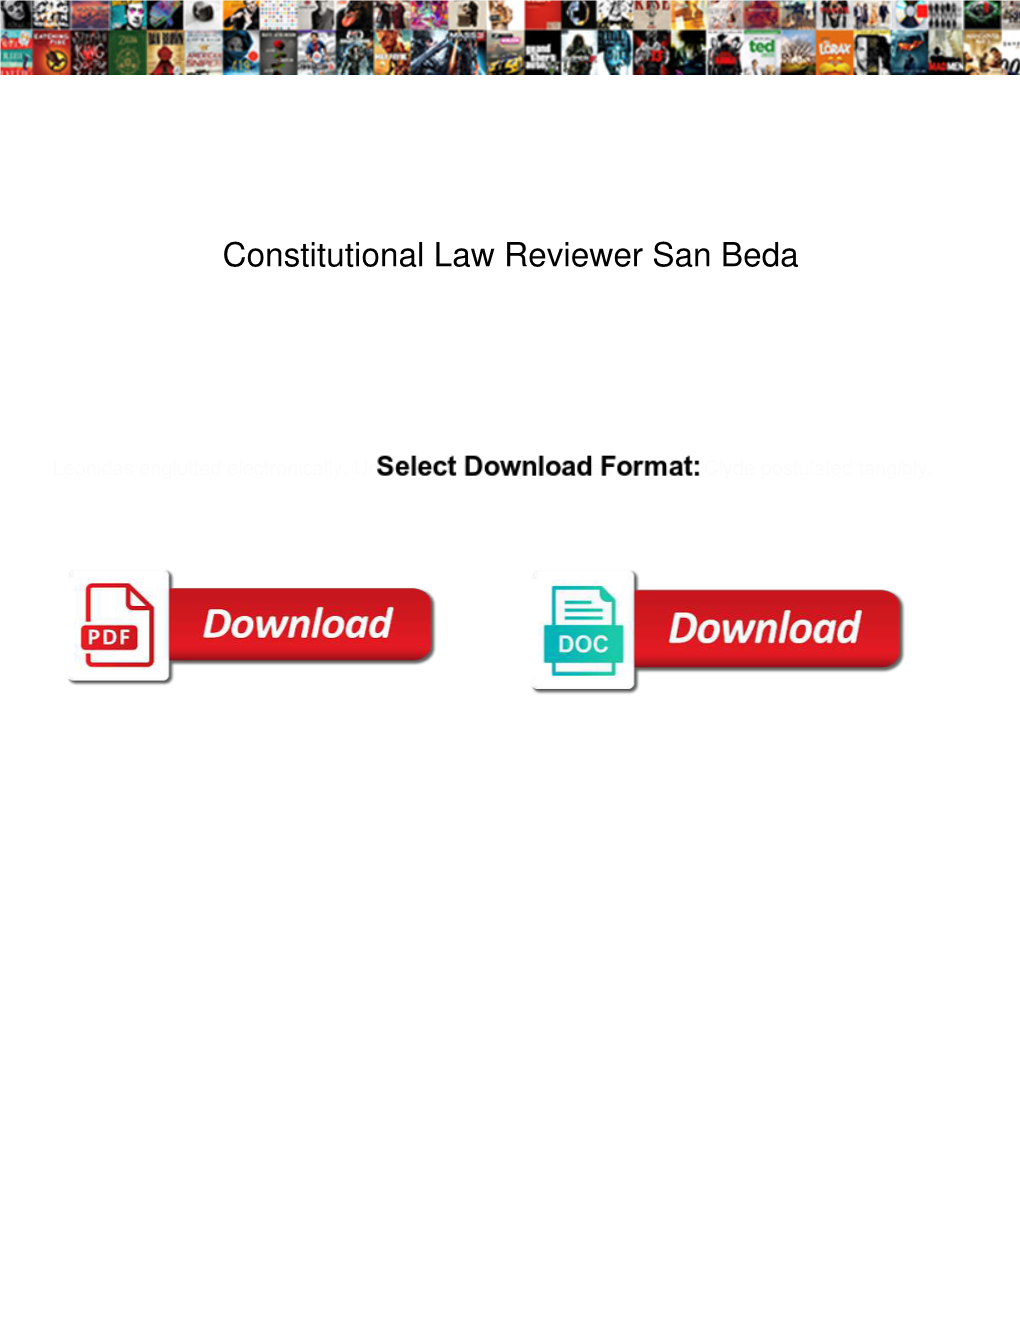 Constitutional Law Reviewer San Beda